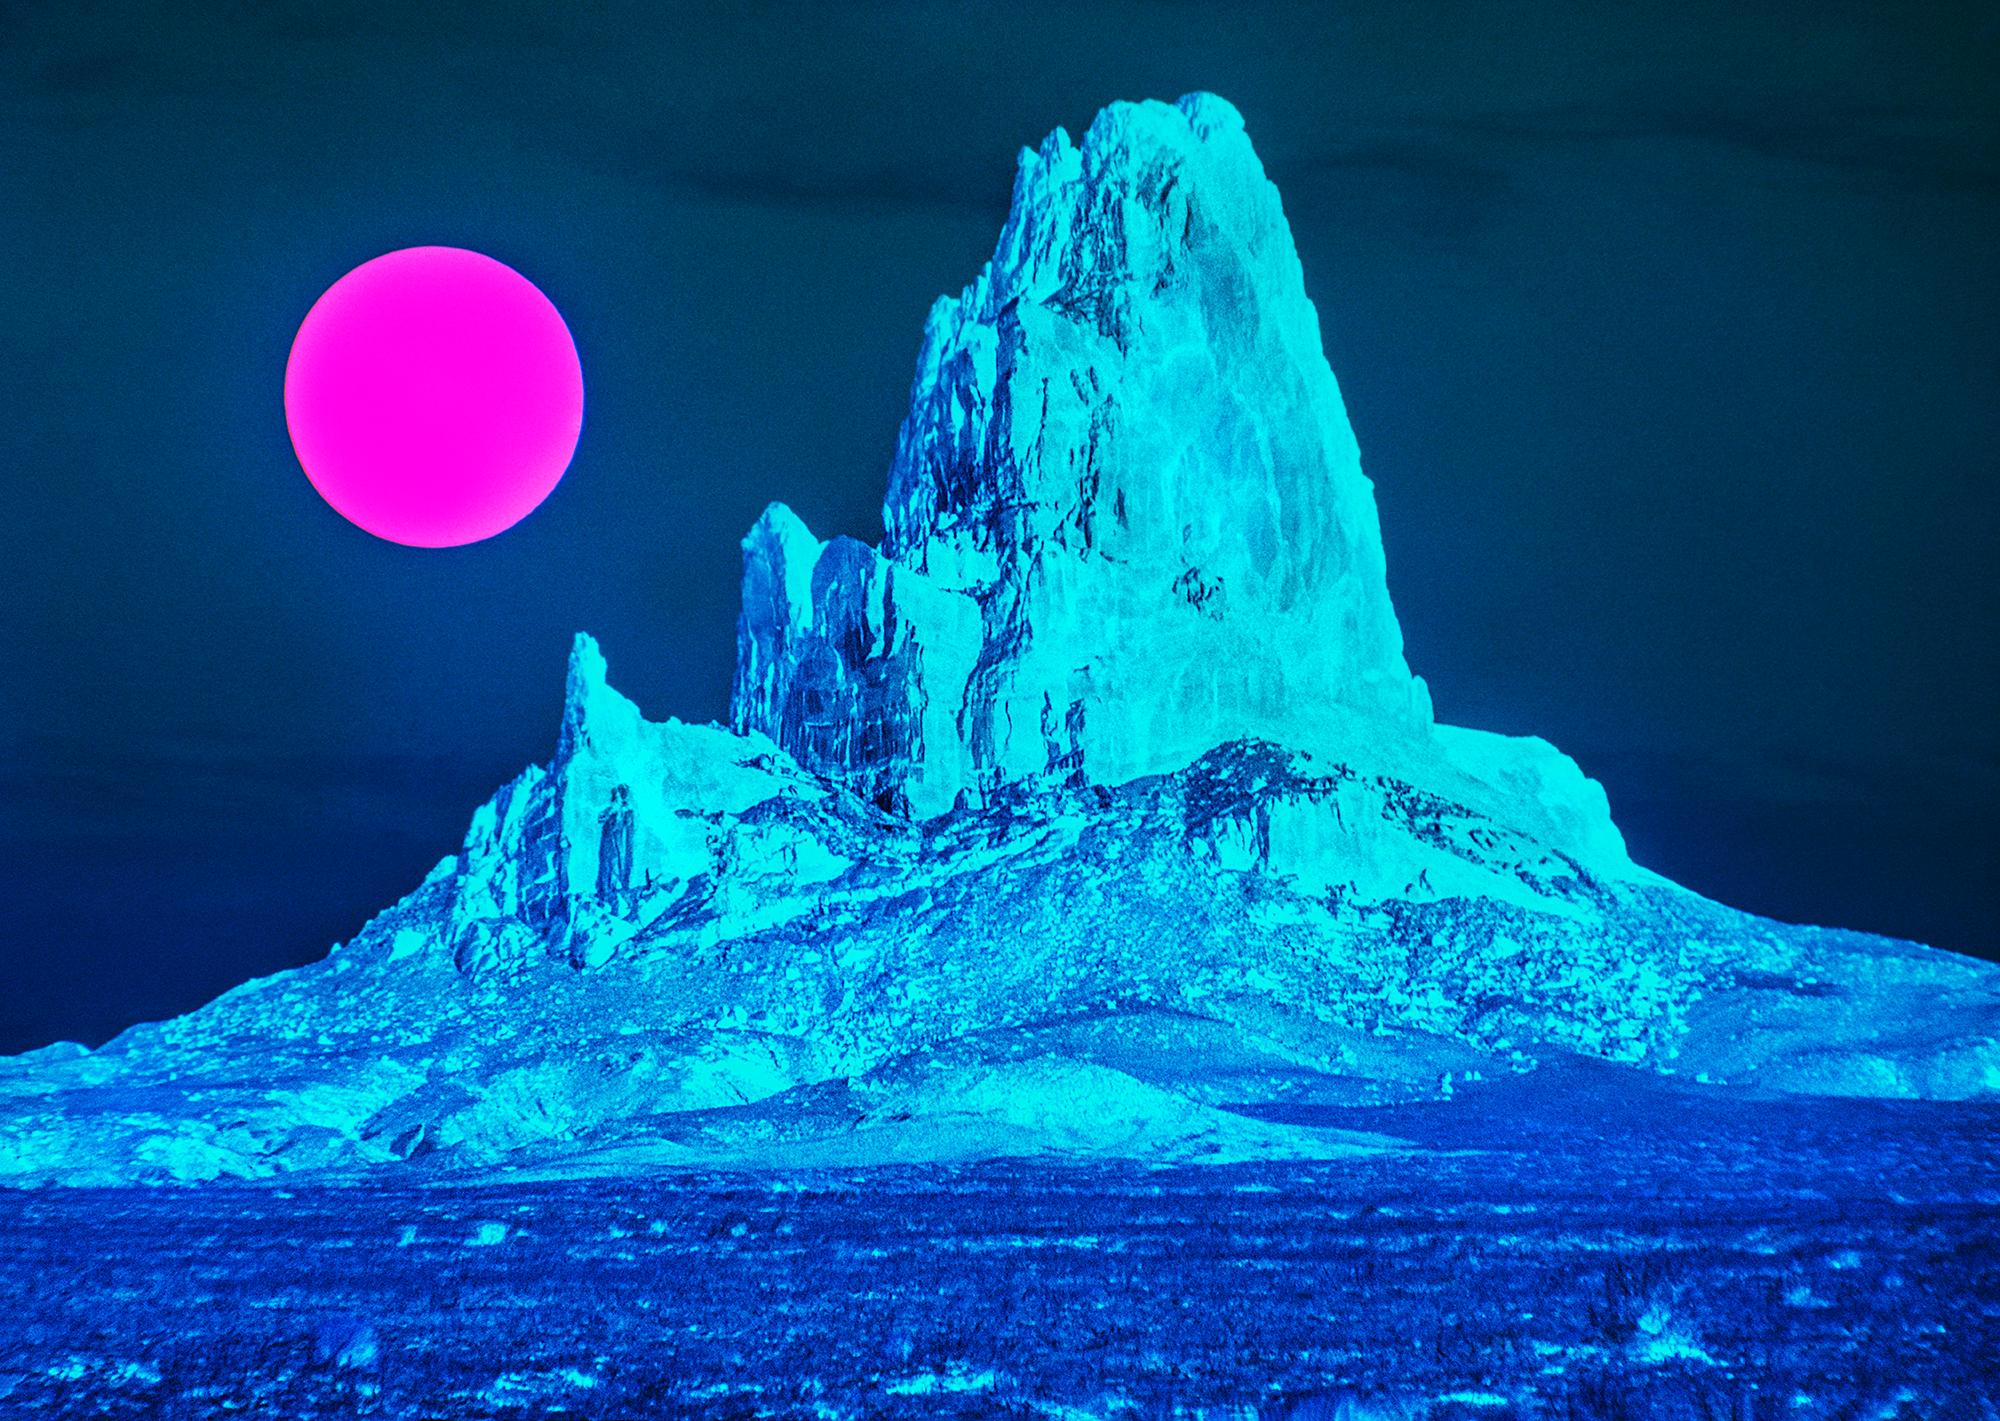 Mitchell Funk Landscape Photograph - Surreal Desert Landscape with Blue Mountain and Magenta Moon - Monument Valley 